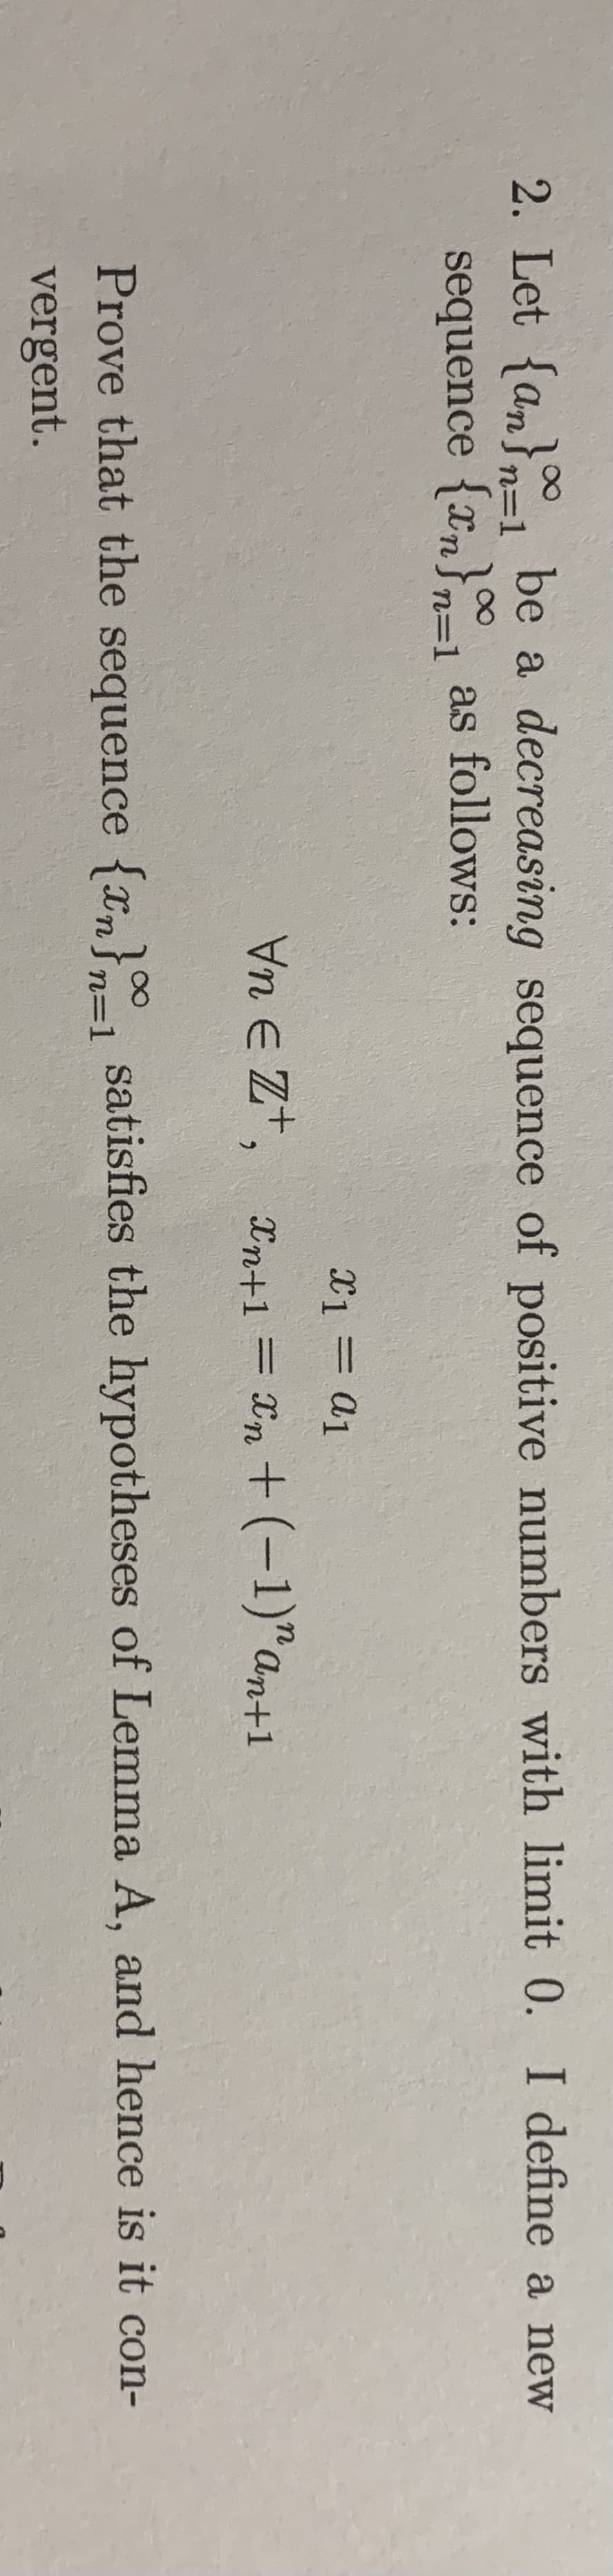 2. Let {an}=l be a decreasing sequence of positive numbers with limit 0. I define a new
sequence {xn}= as follows:
n=1
n=1
X1 = a1
Vn E Zt, xn+1 = Xn + (-1)"an+1
%3D
Prove that the sequence {xn}n=1 satisfies the hypotheses of Lemma A, and hence is it con-
vergent.
